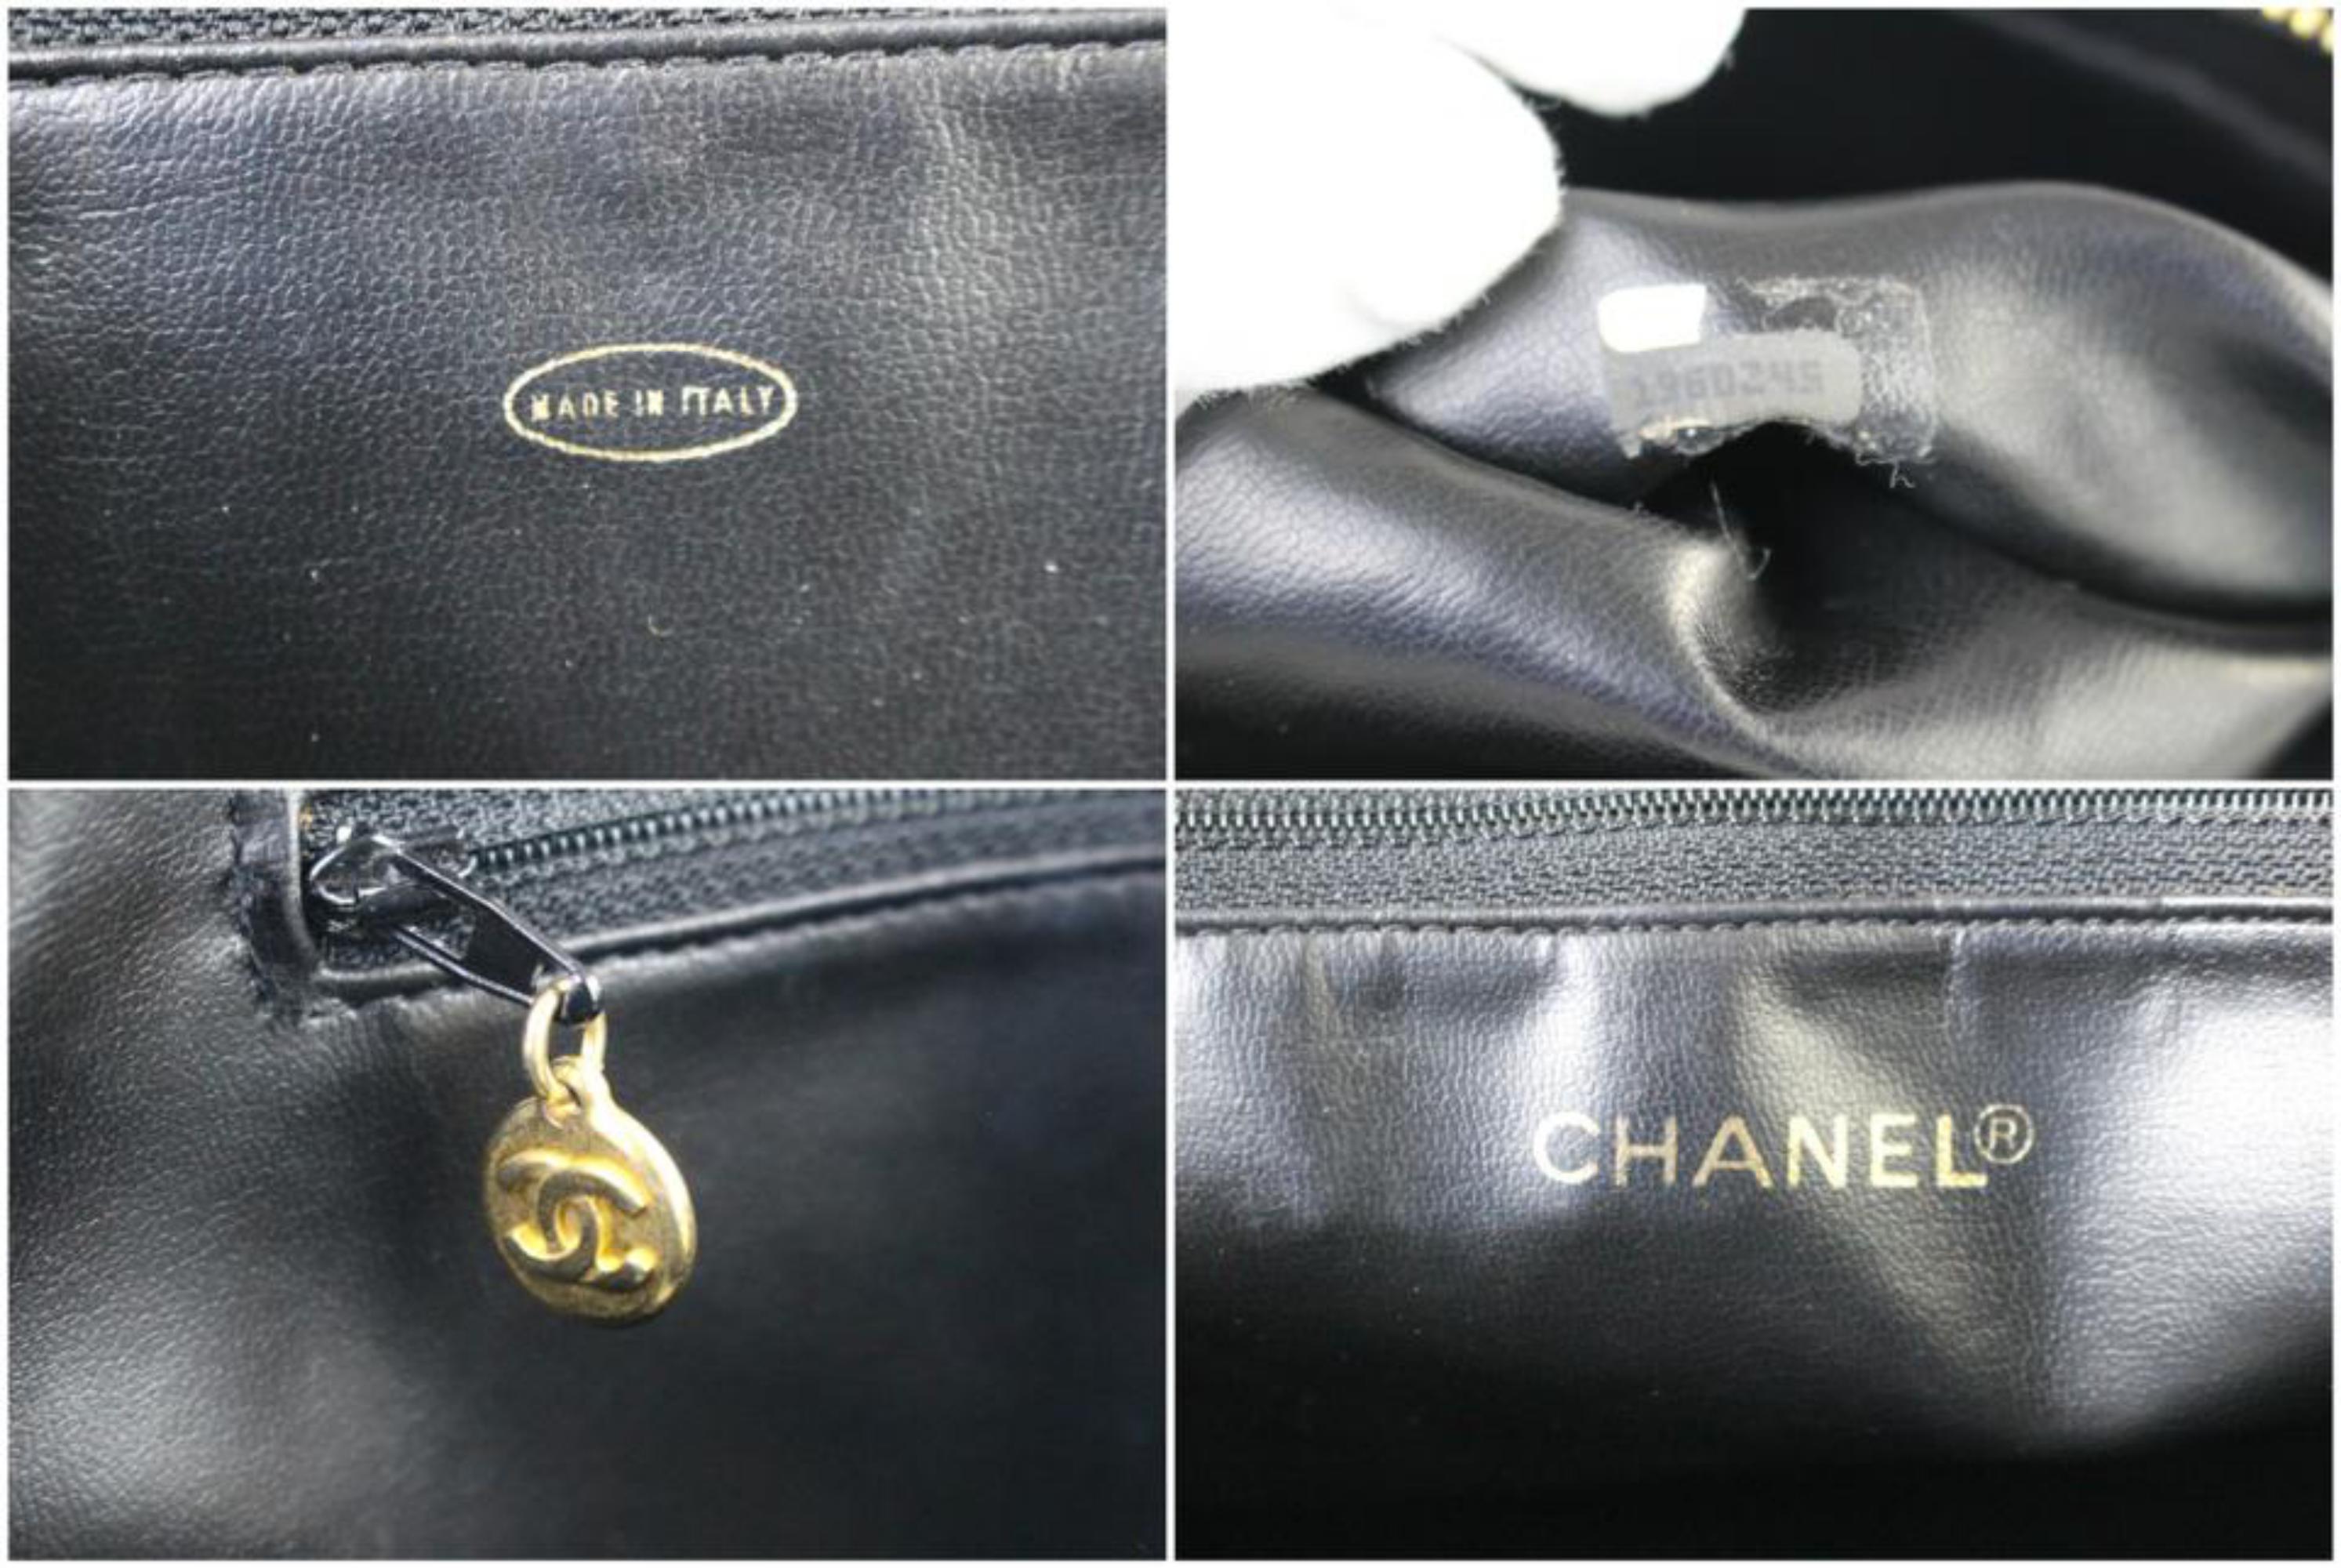 Chanel Quilted Chebron 224196 Black Patent Leather Satchel In Good Condition For Sale In Forest Hills, NY